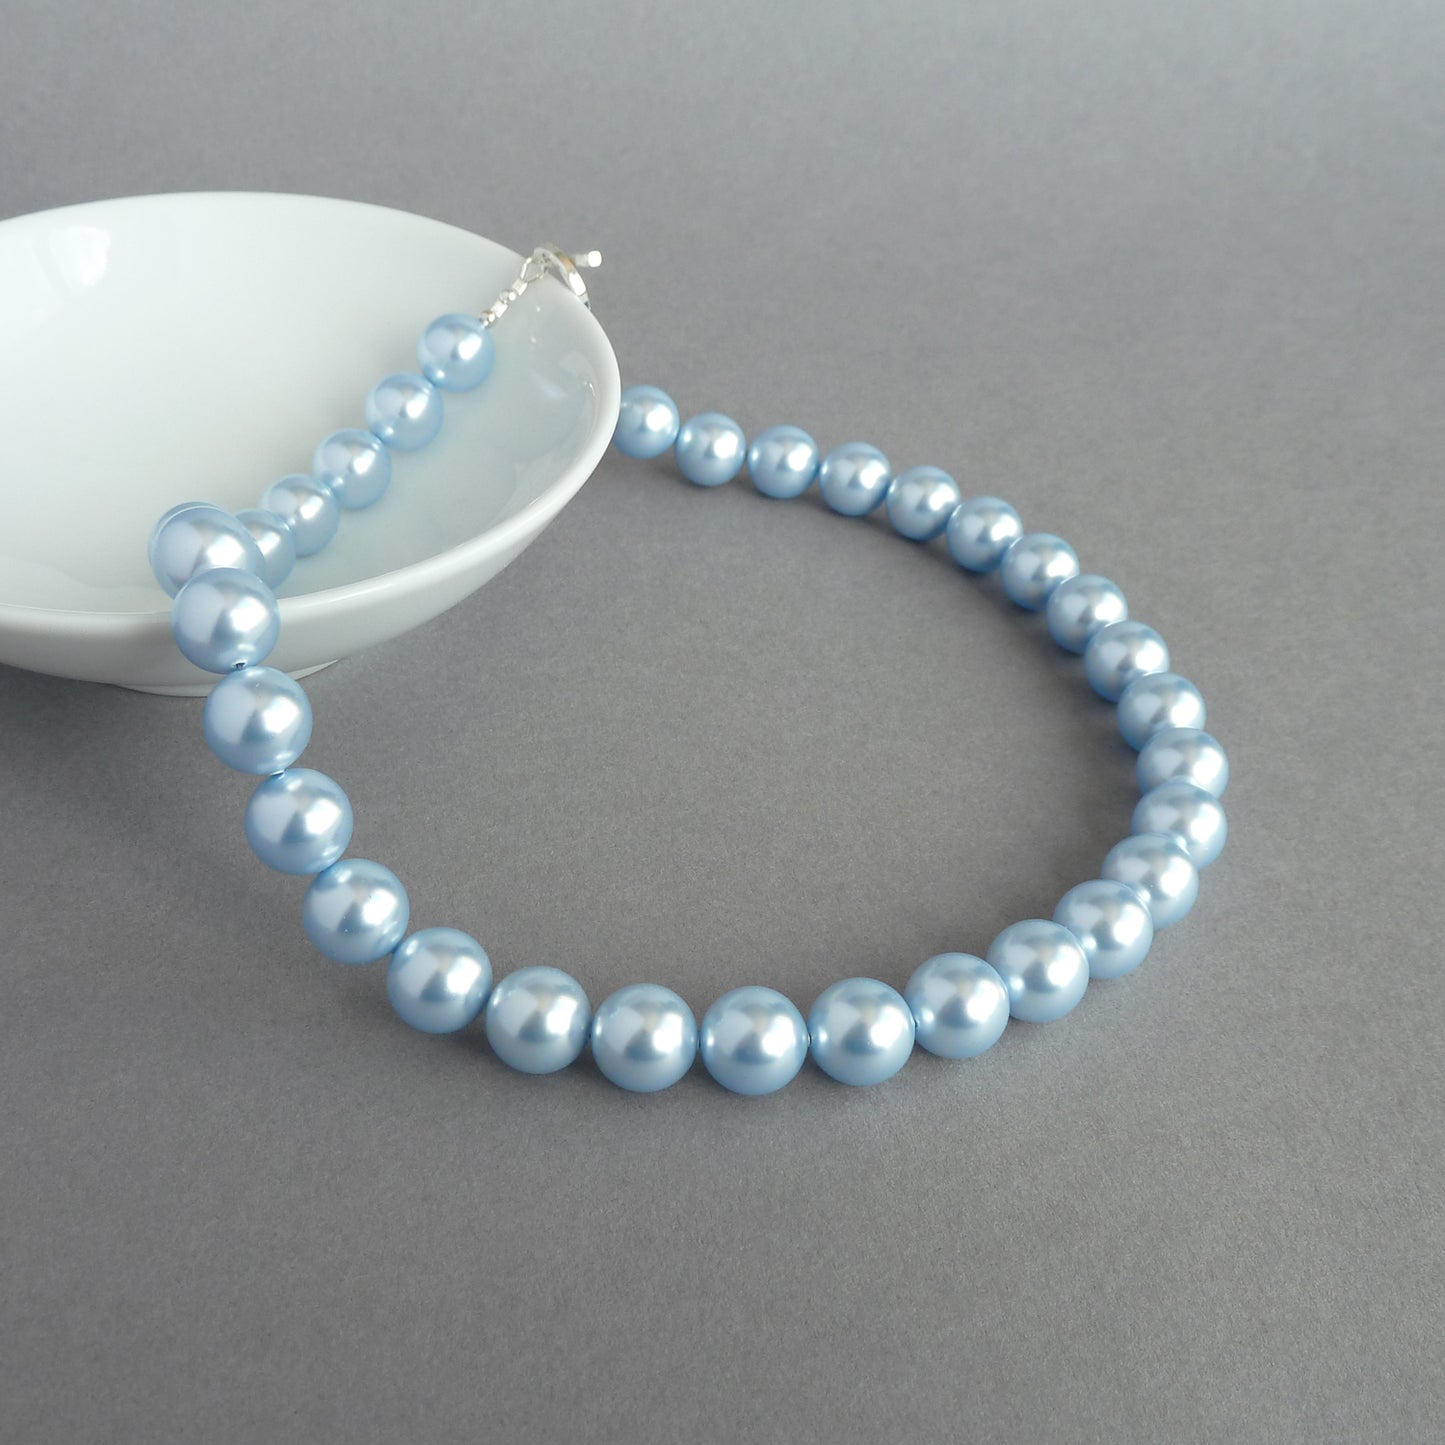 Chunky pale blue pearl necklace